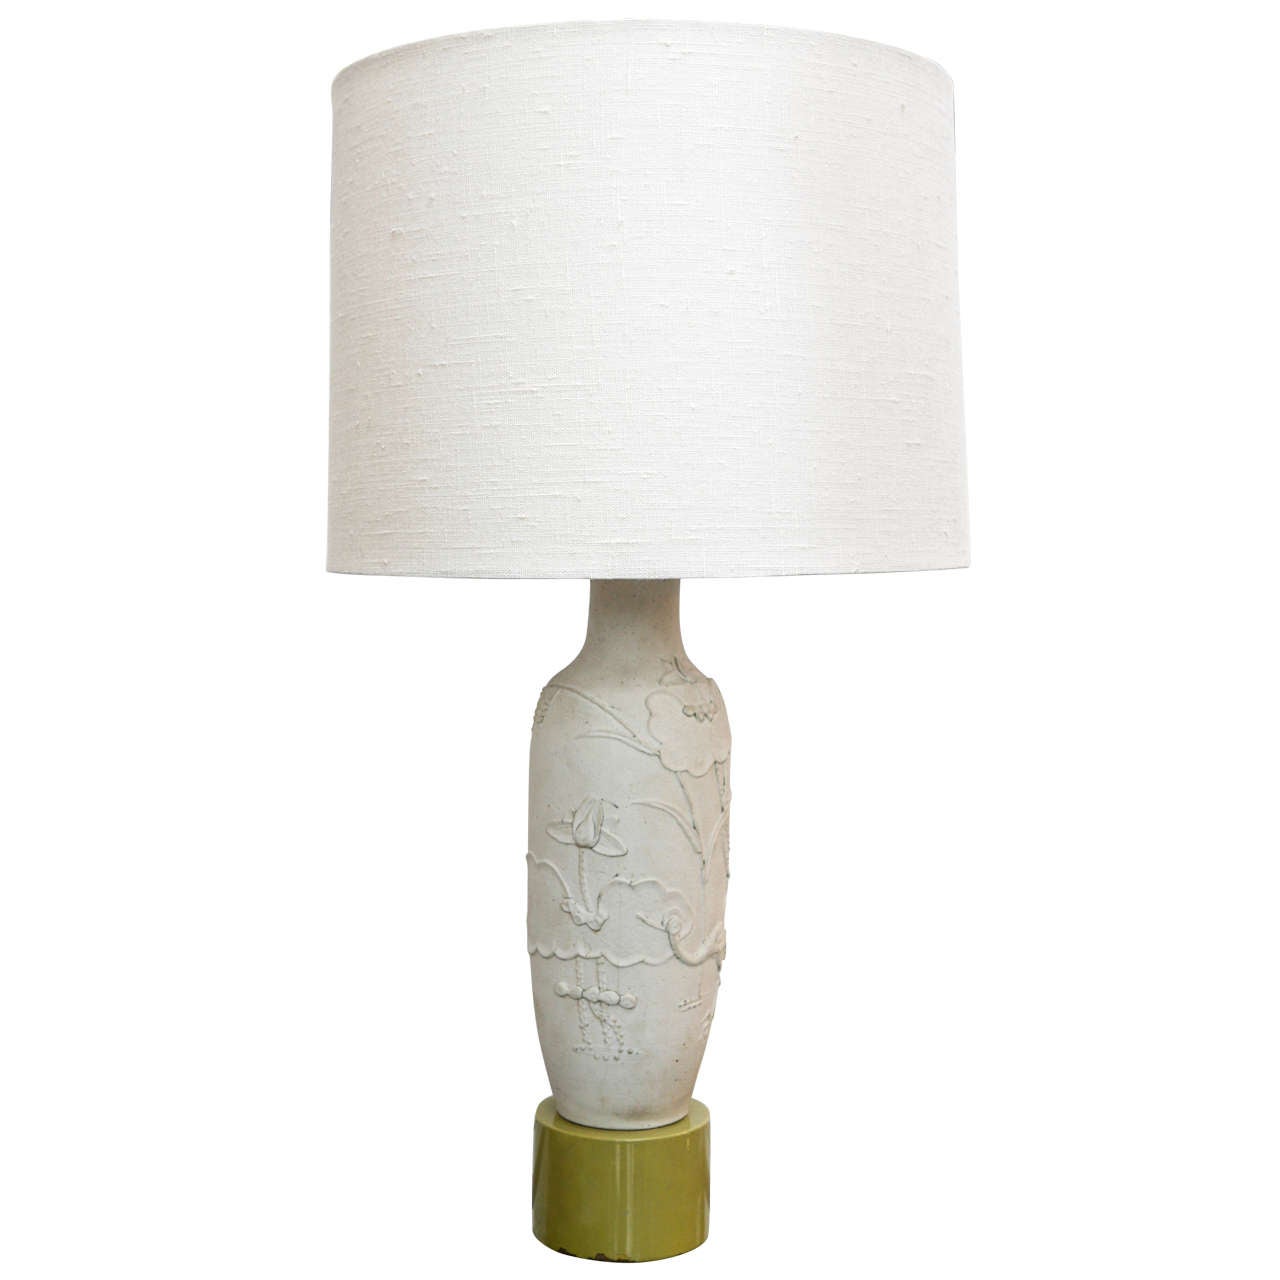 William Haines Bisque Table Lamp from the Prinzmetal Estate